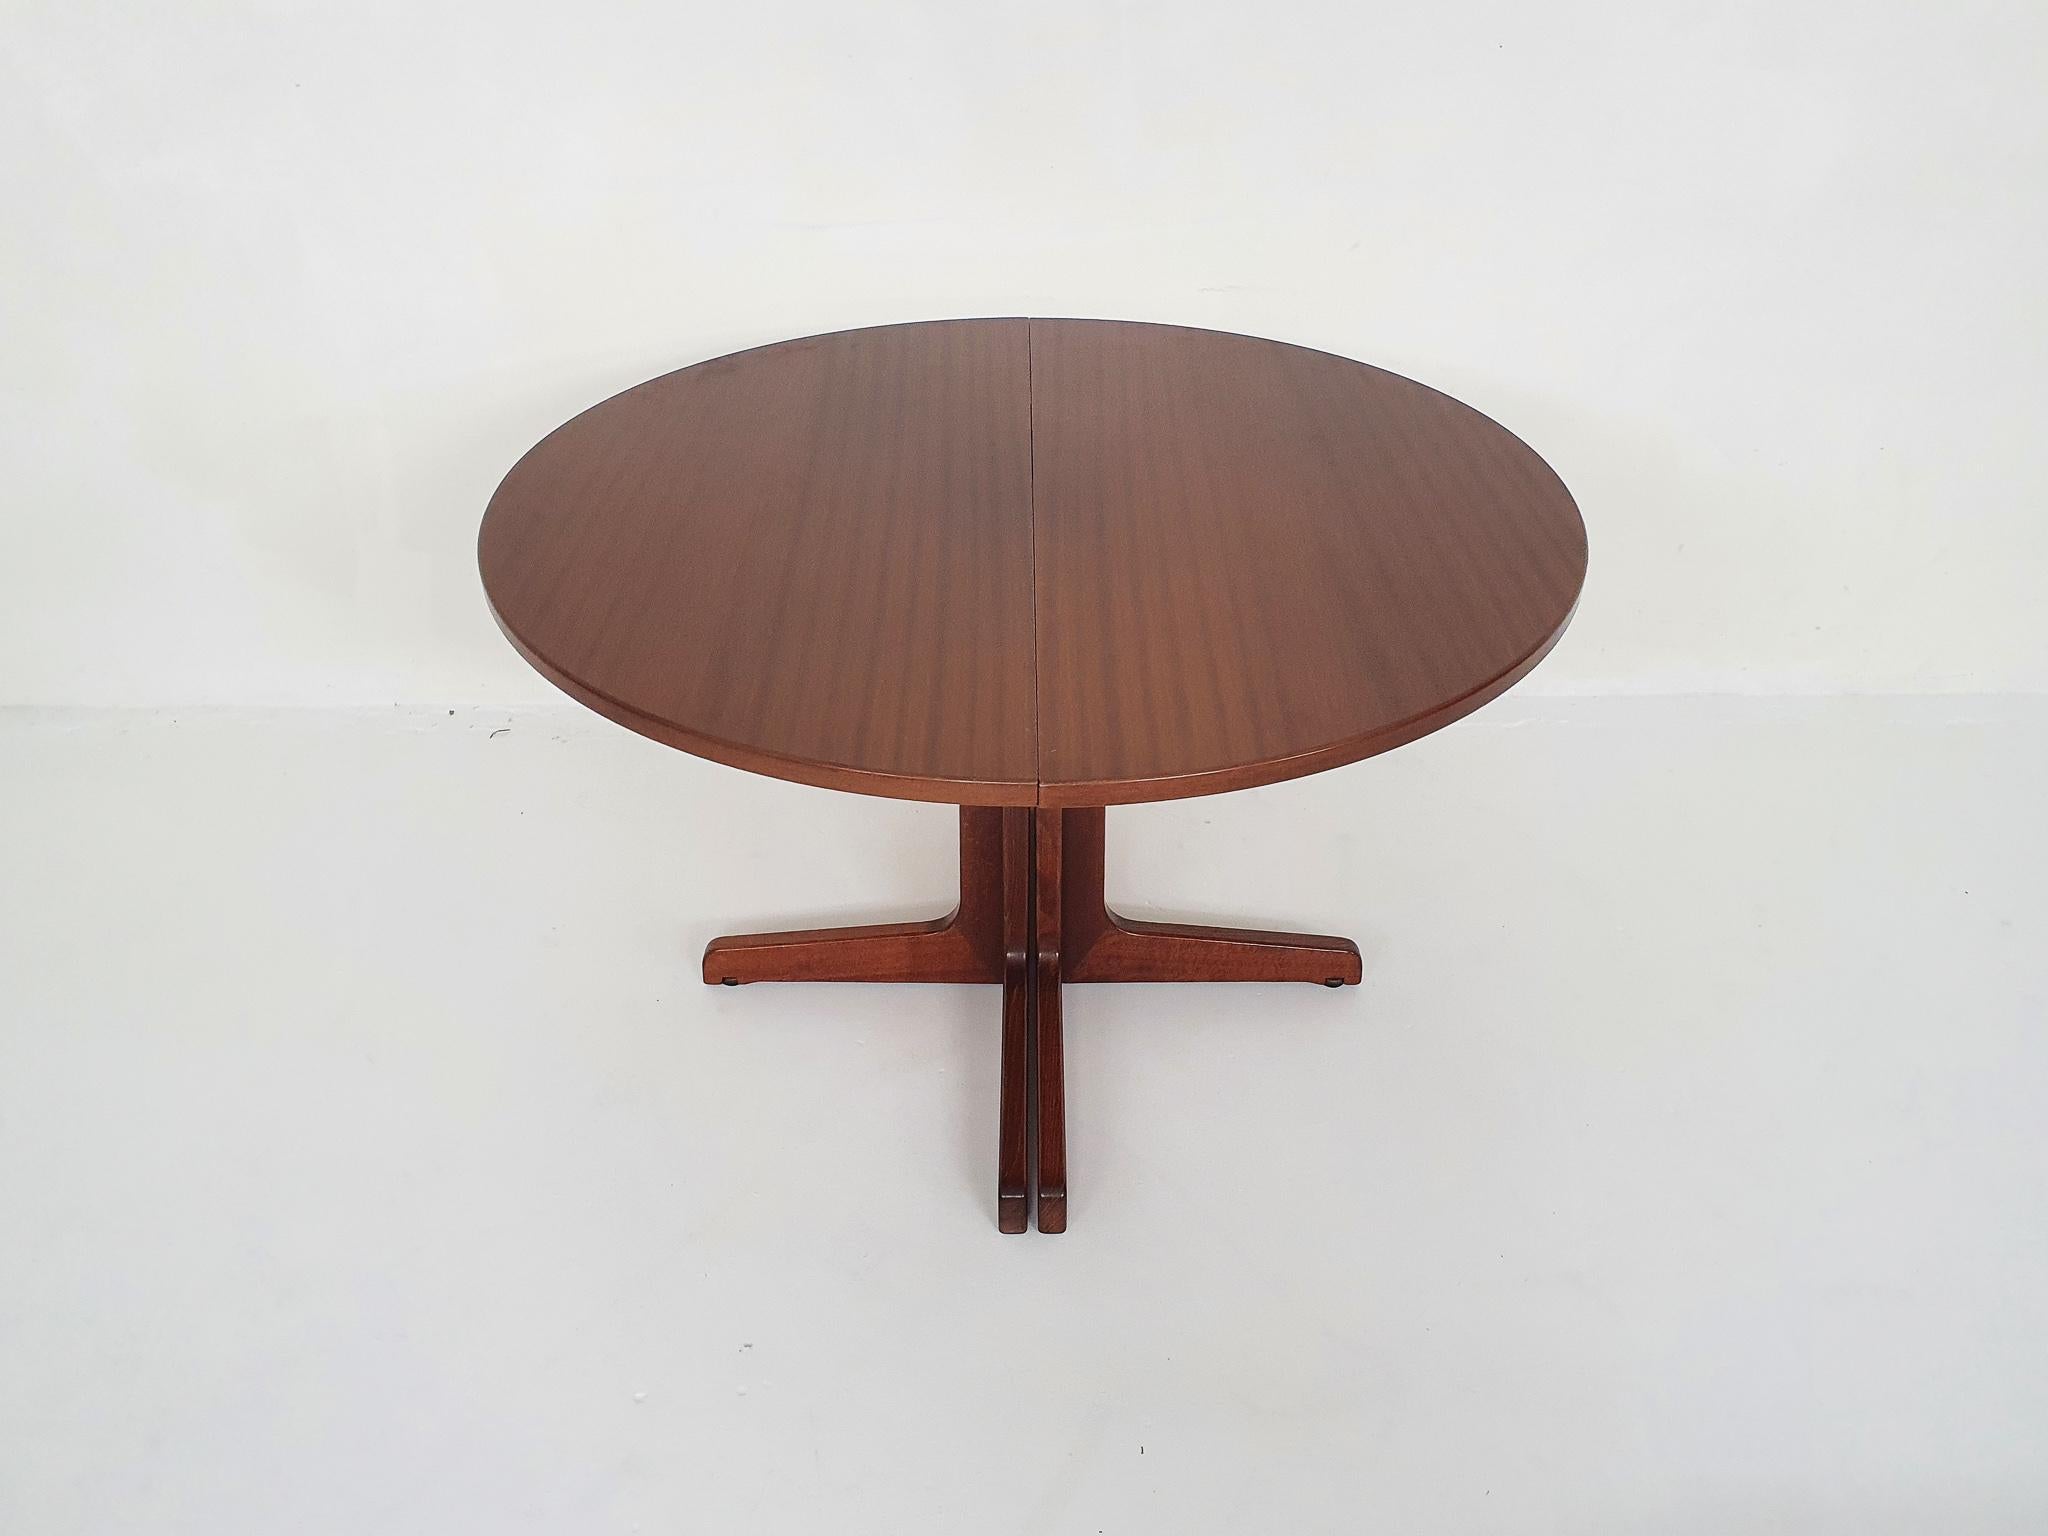 Dark brown laquered dining table. The round dining table (diameter 120cm) can be extedended by adding two extension leaves to create an oval dining table of 180cm or 240cm long. The extension part are to be stored seperatly.
In good original